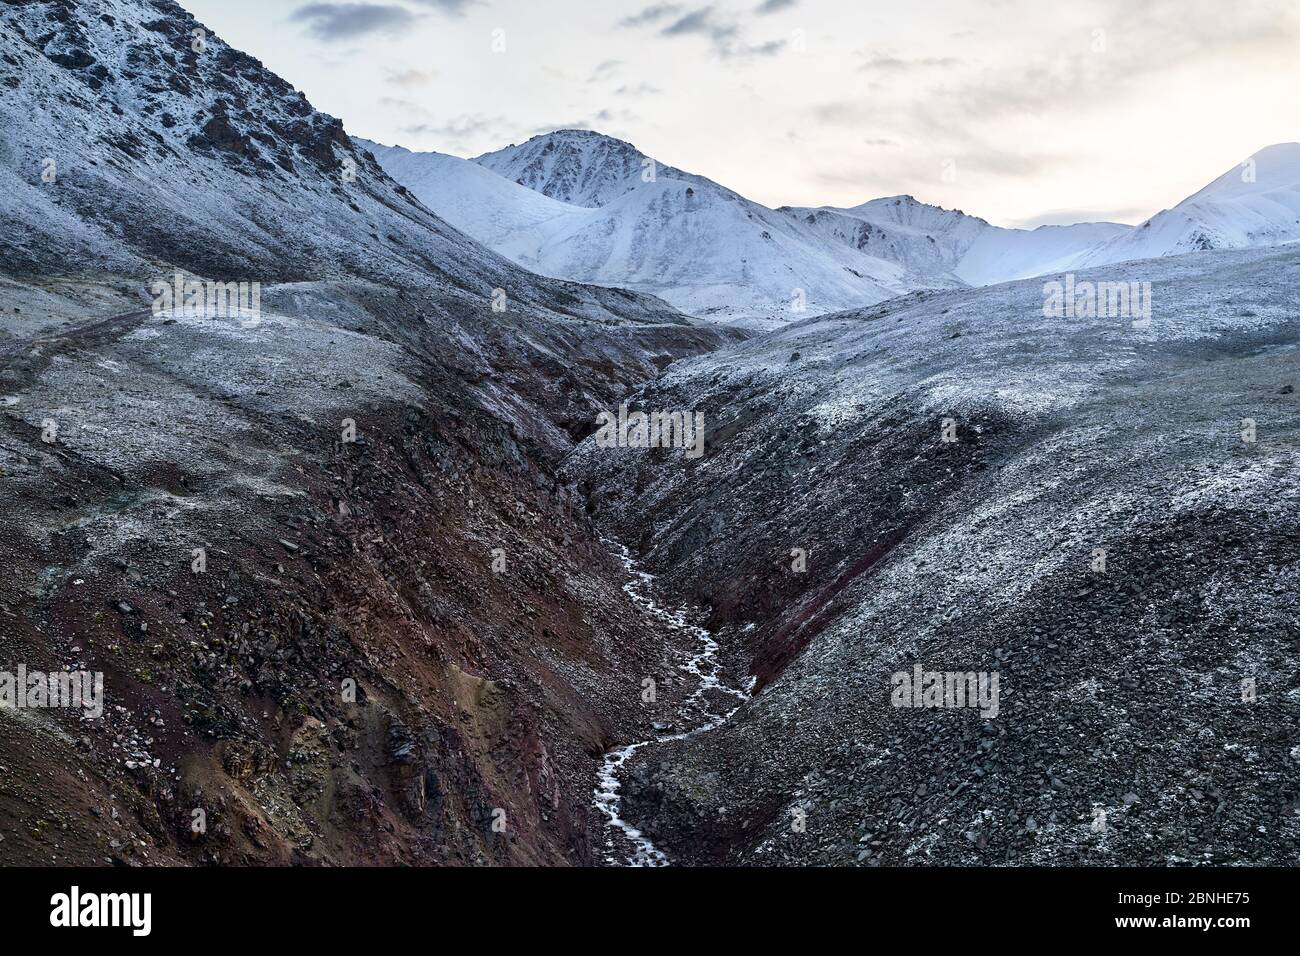 Beautiful scenery of snowy mountains and river in the Tien Shan valley of South Kazakhstan Stock Photo